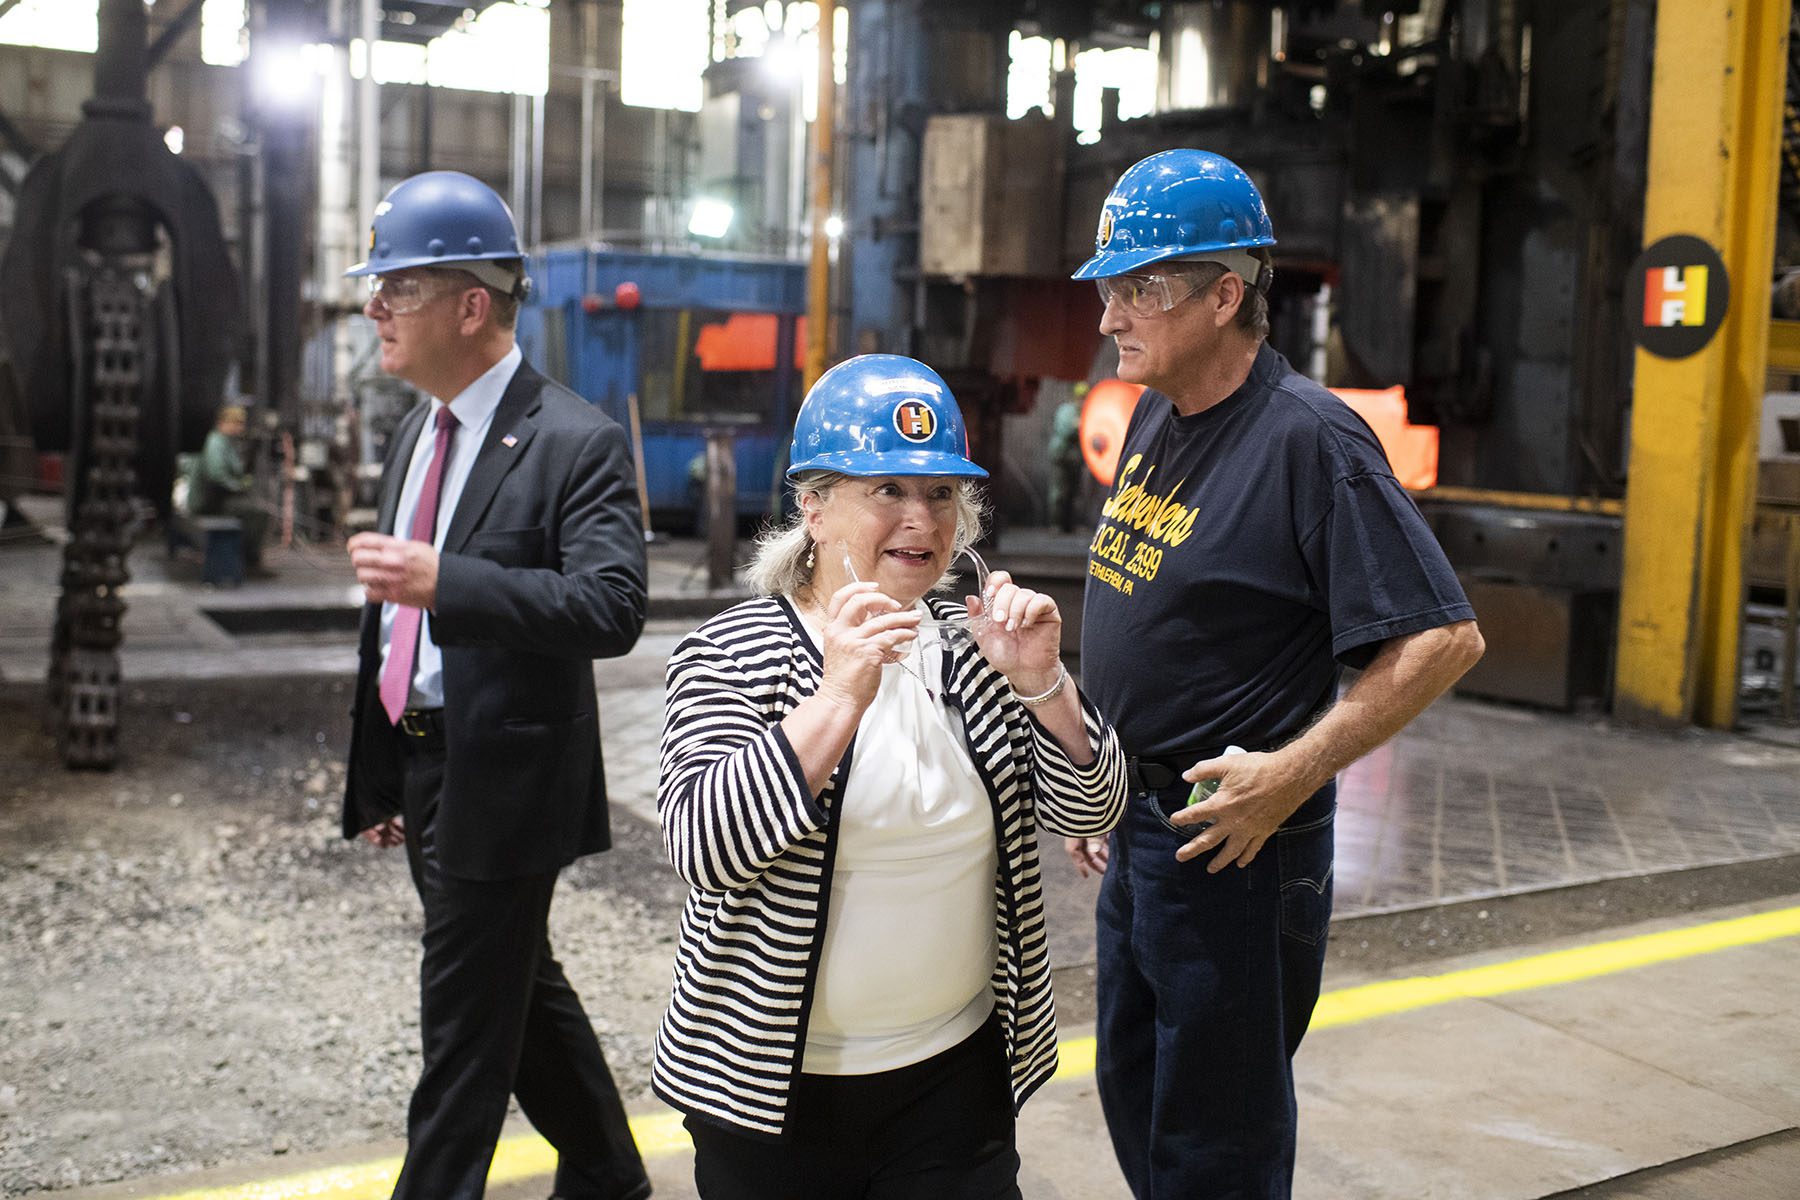 Rep. Susan Wild wears a hard hat and protective glasses while visiting a forge.